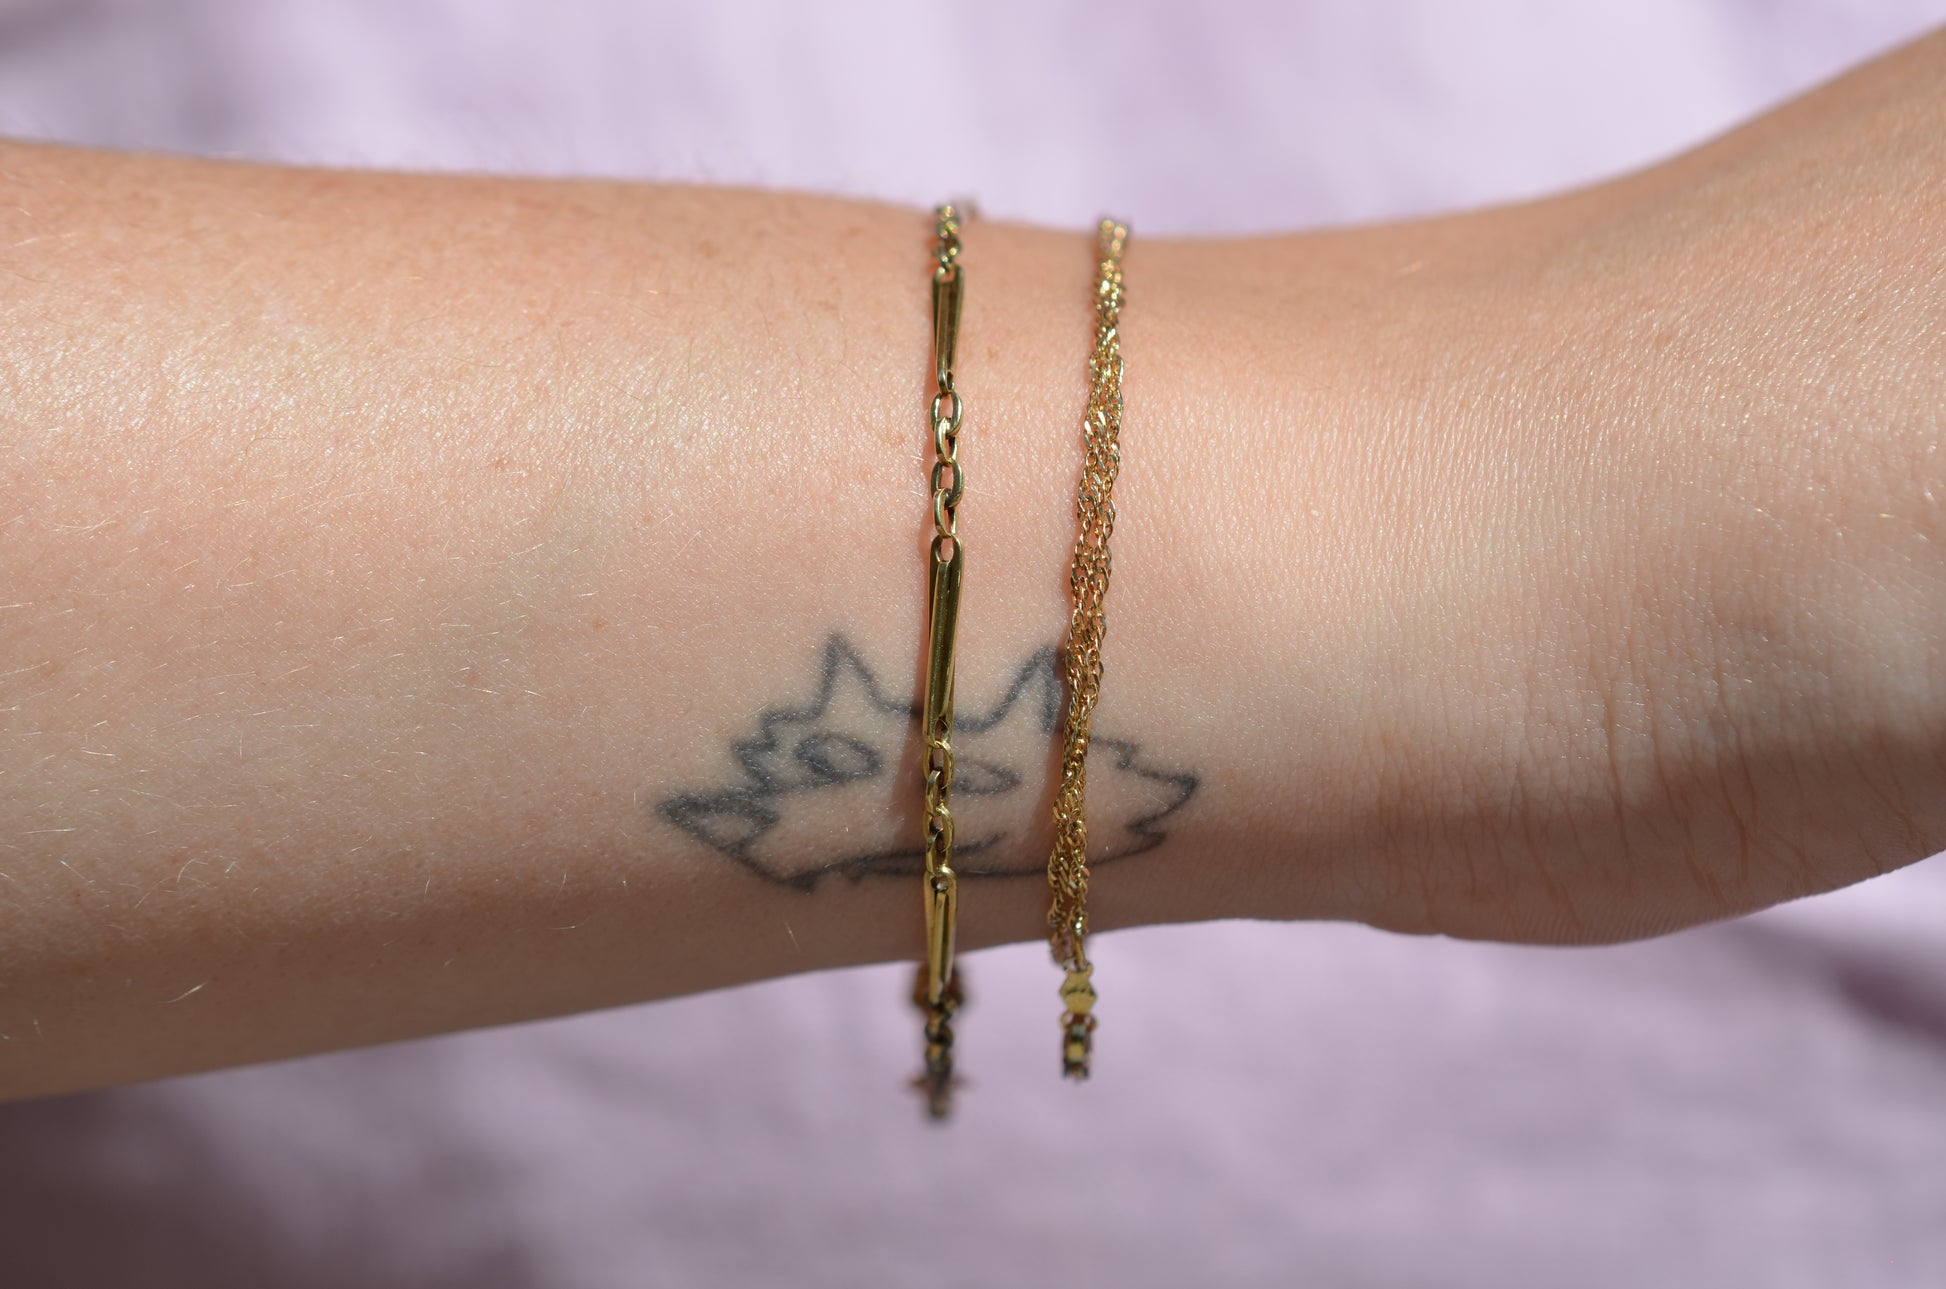 A closely cropped view of the bracelet on a Caucasian model's wrist. She is wearing several other gold bracelets and has a small tattoo of the "Space Coyote" character from The Simpsons.